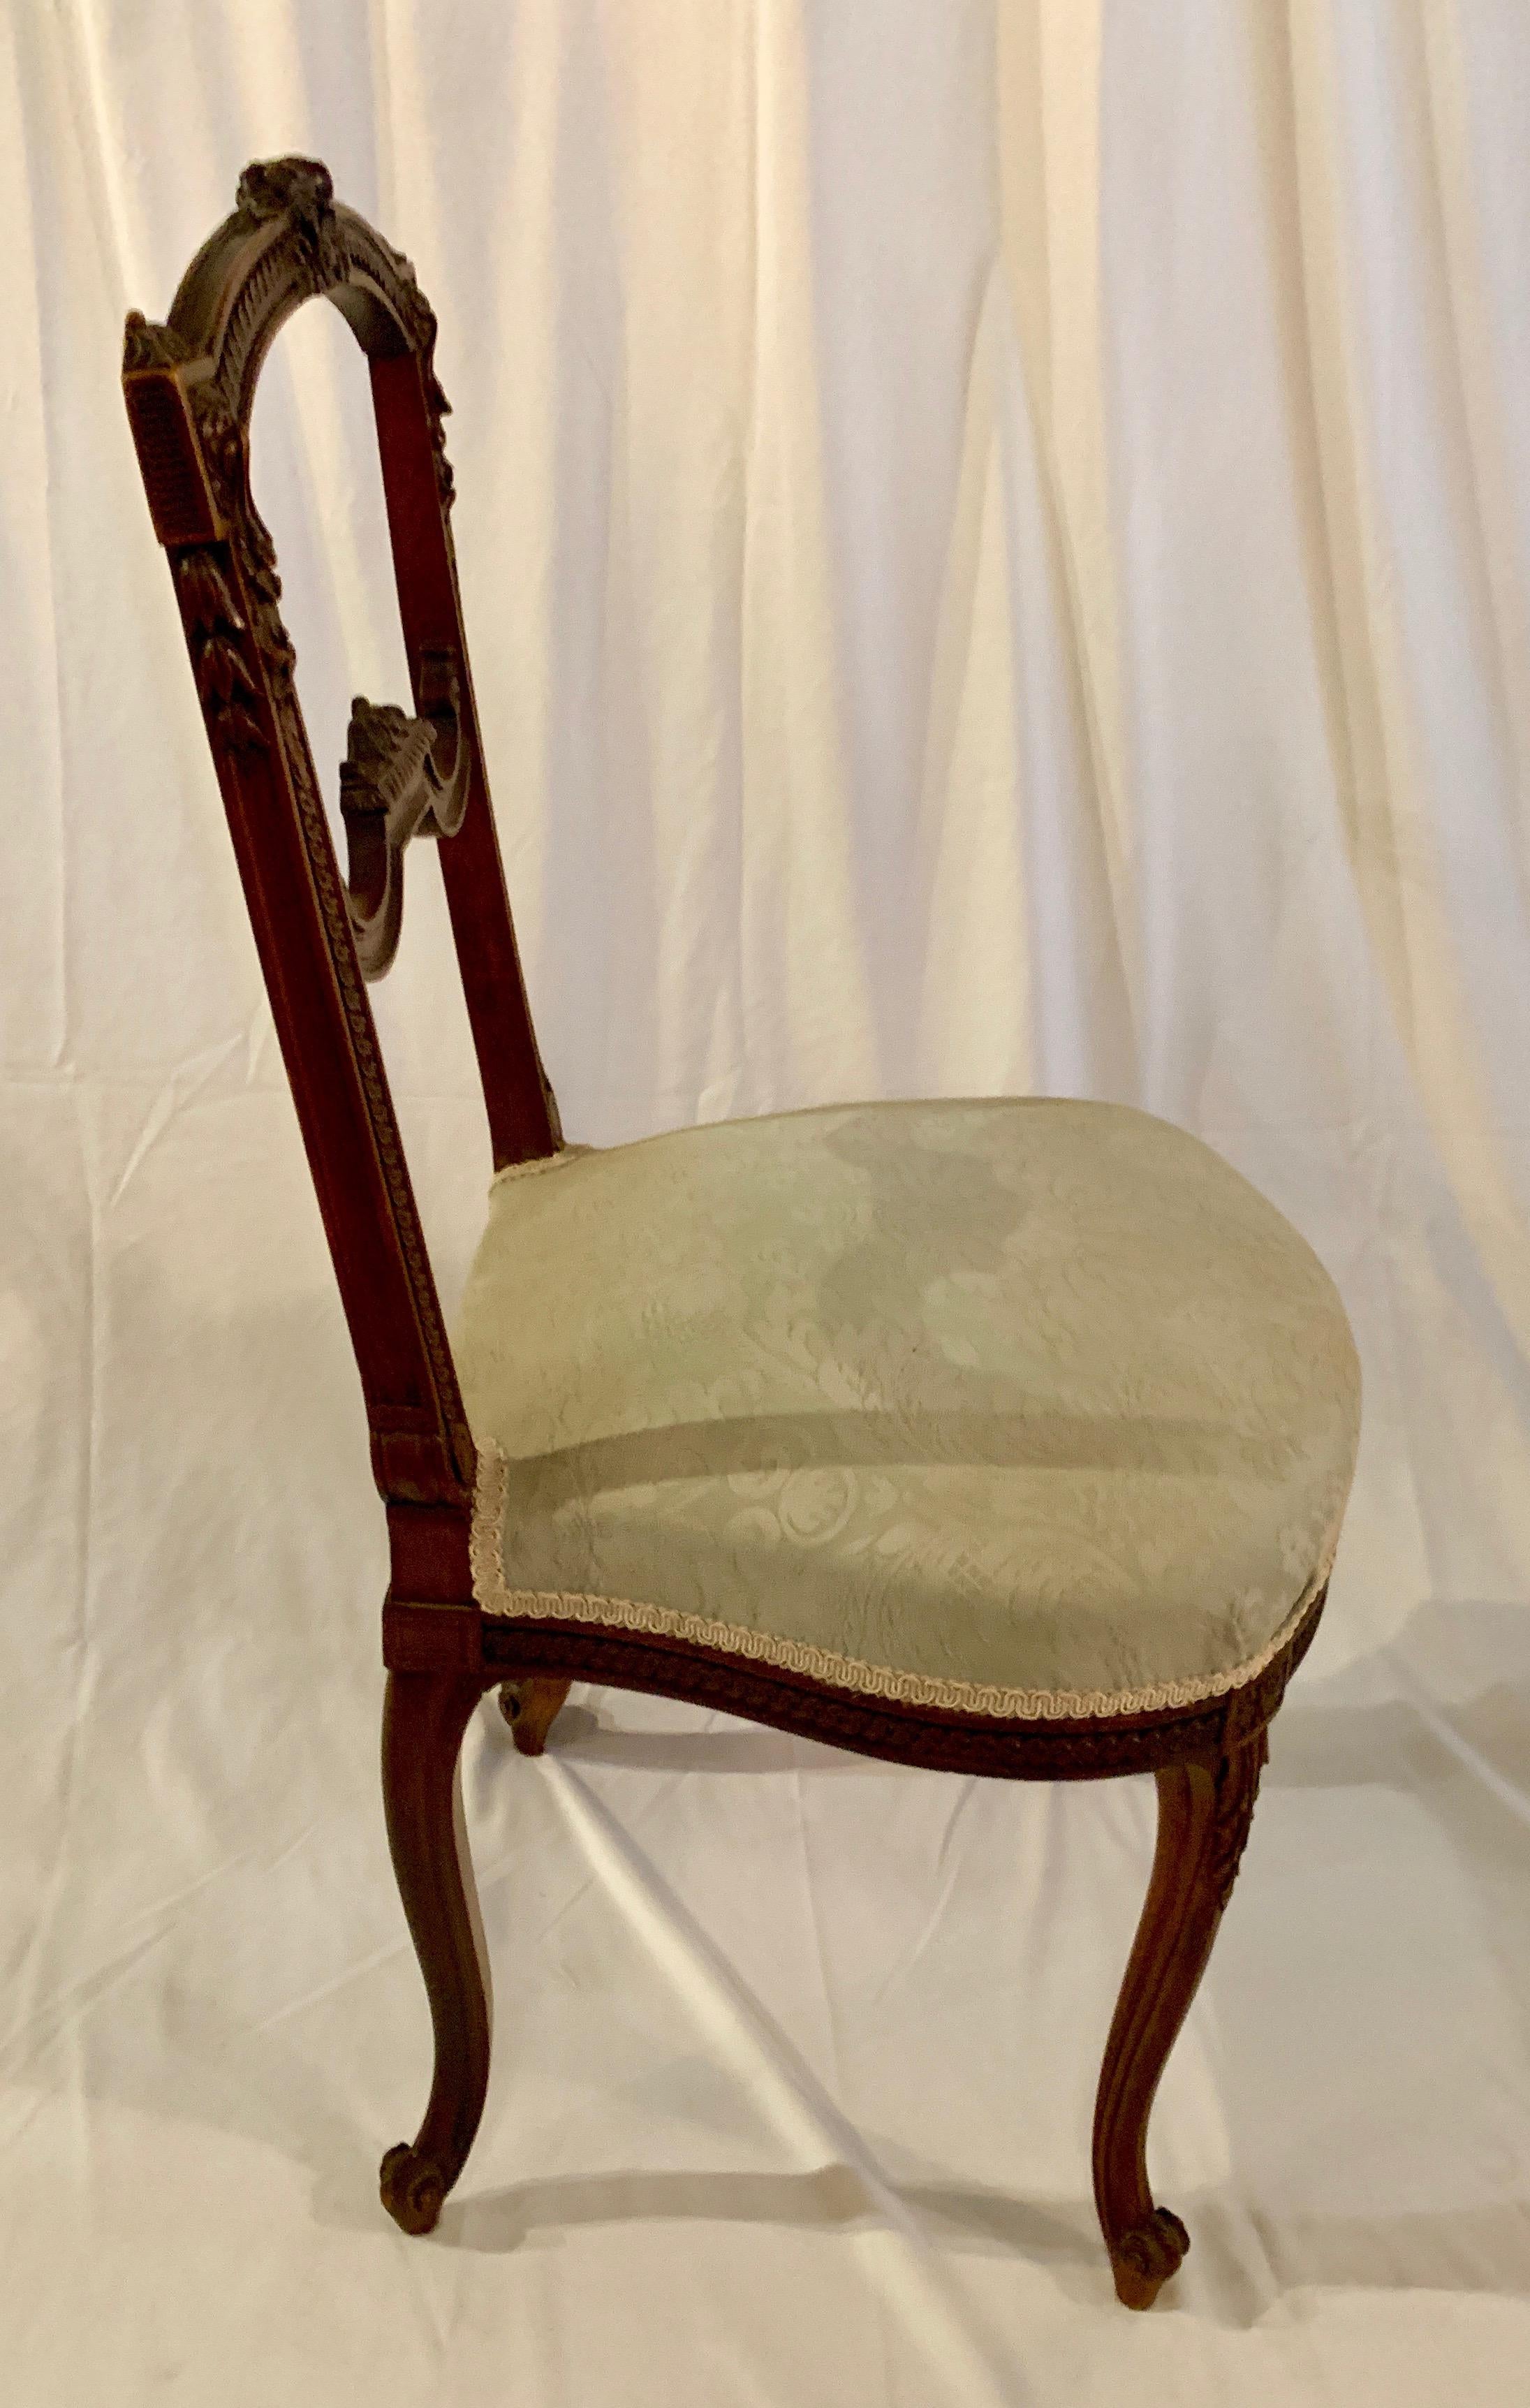 A nicely carved small French chair. The very perfect occasional chair for a salon or dressing room area.